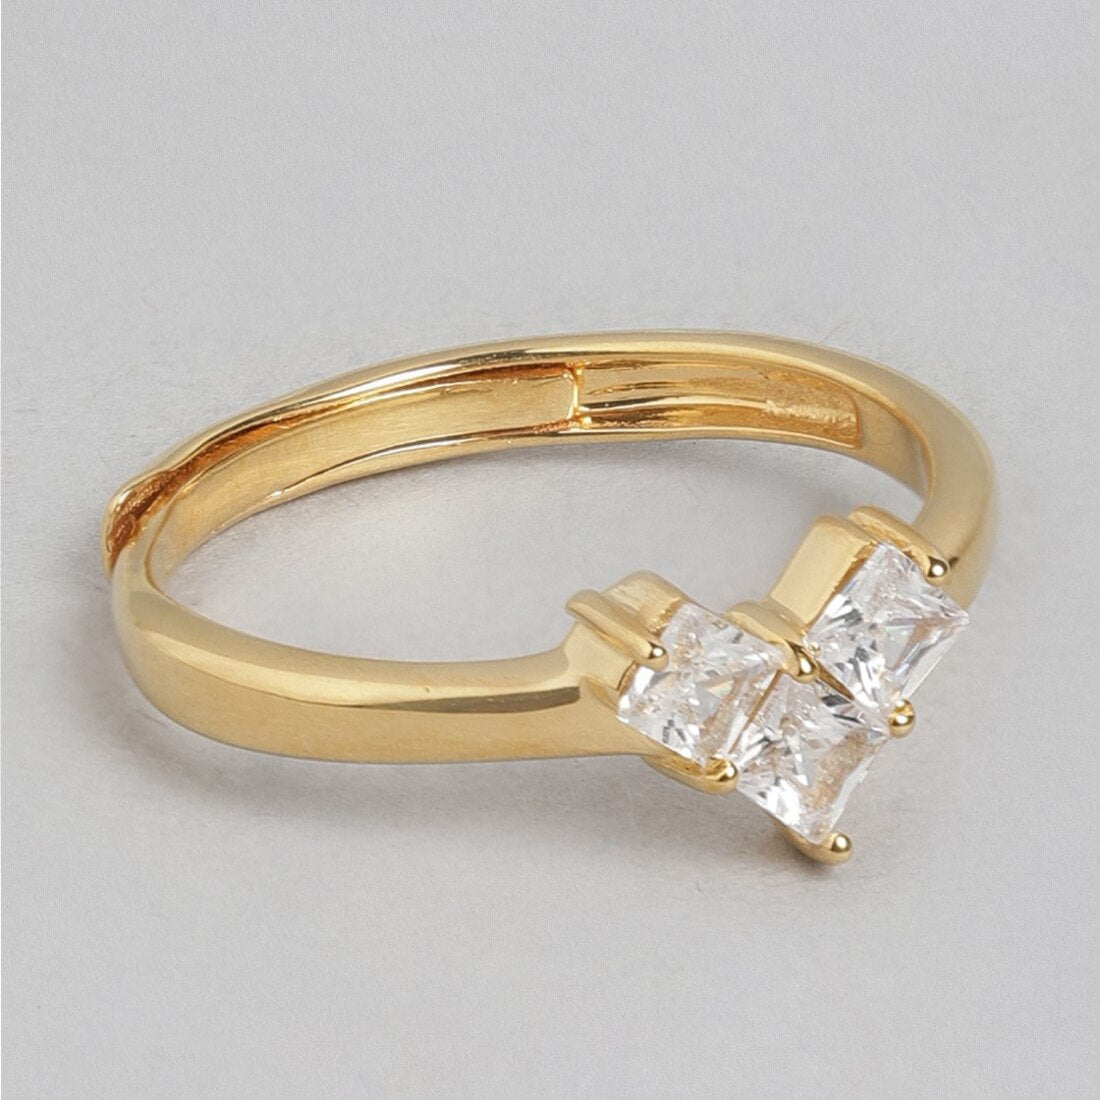 Golden Love Gold-Plated 925 Sterling Silver Ring with White Cubic Zirconia